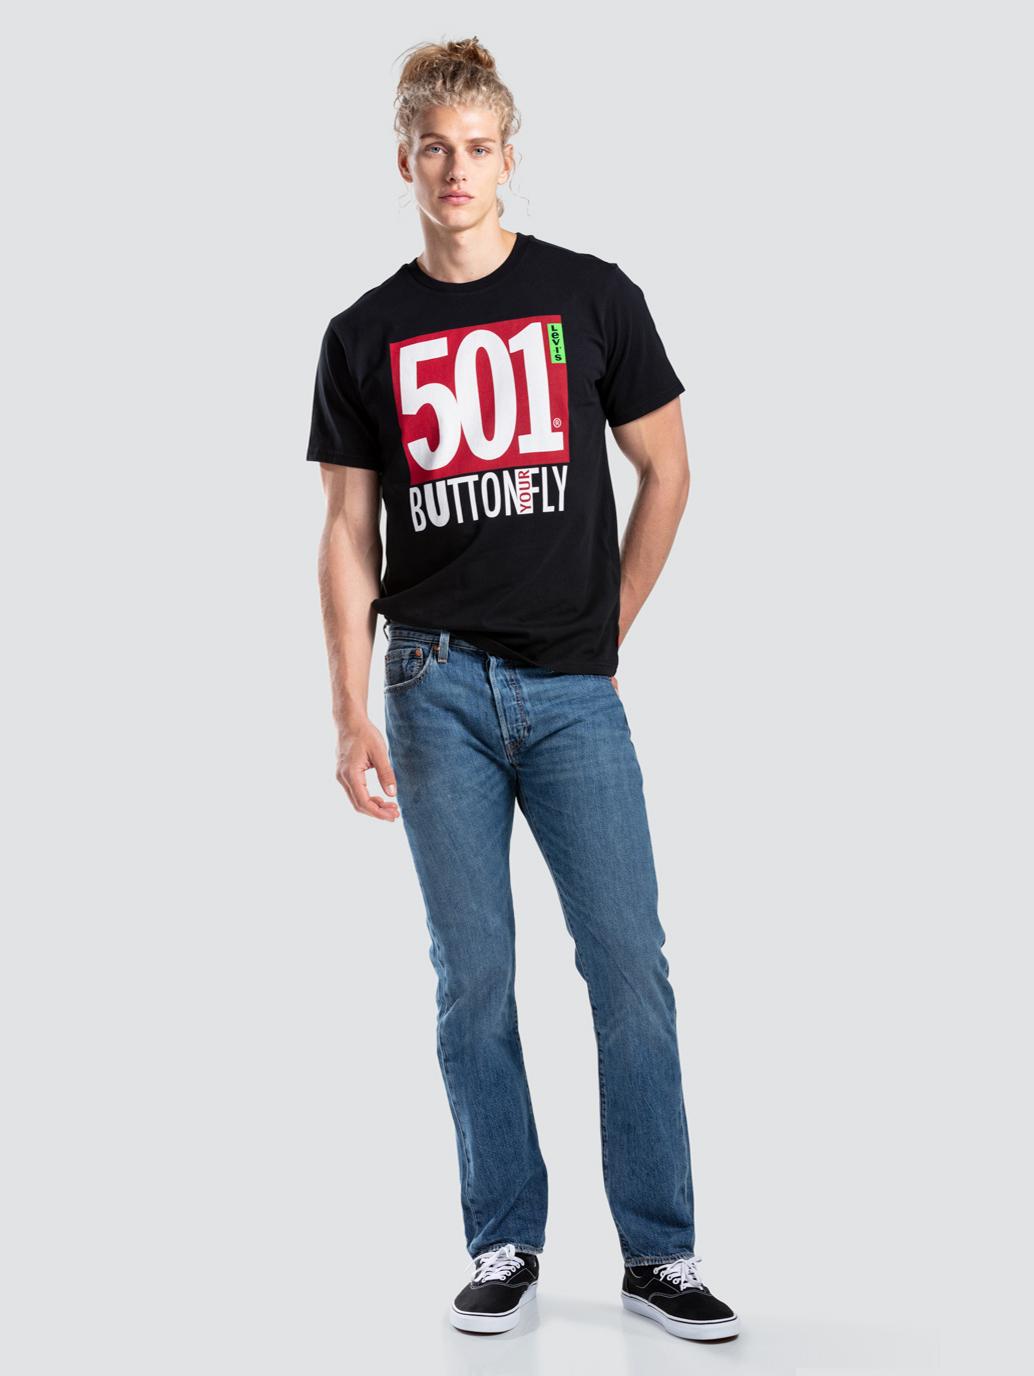 levis malaysia 501 original jeans 005012709 10 Model Front